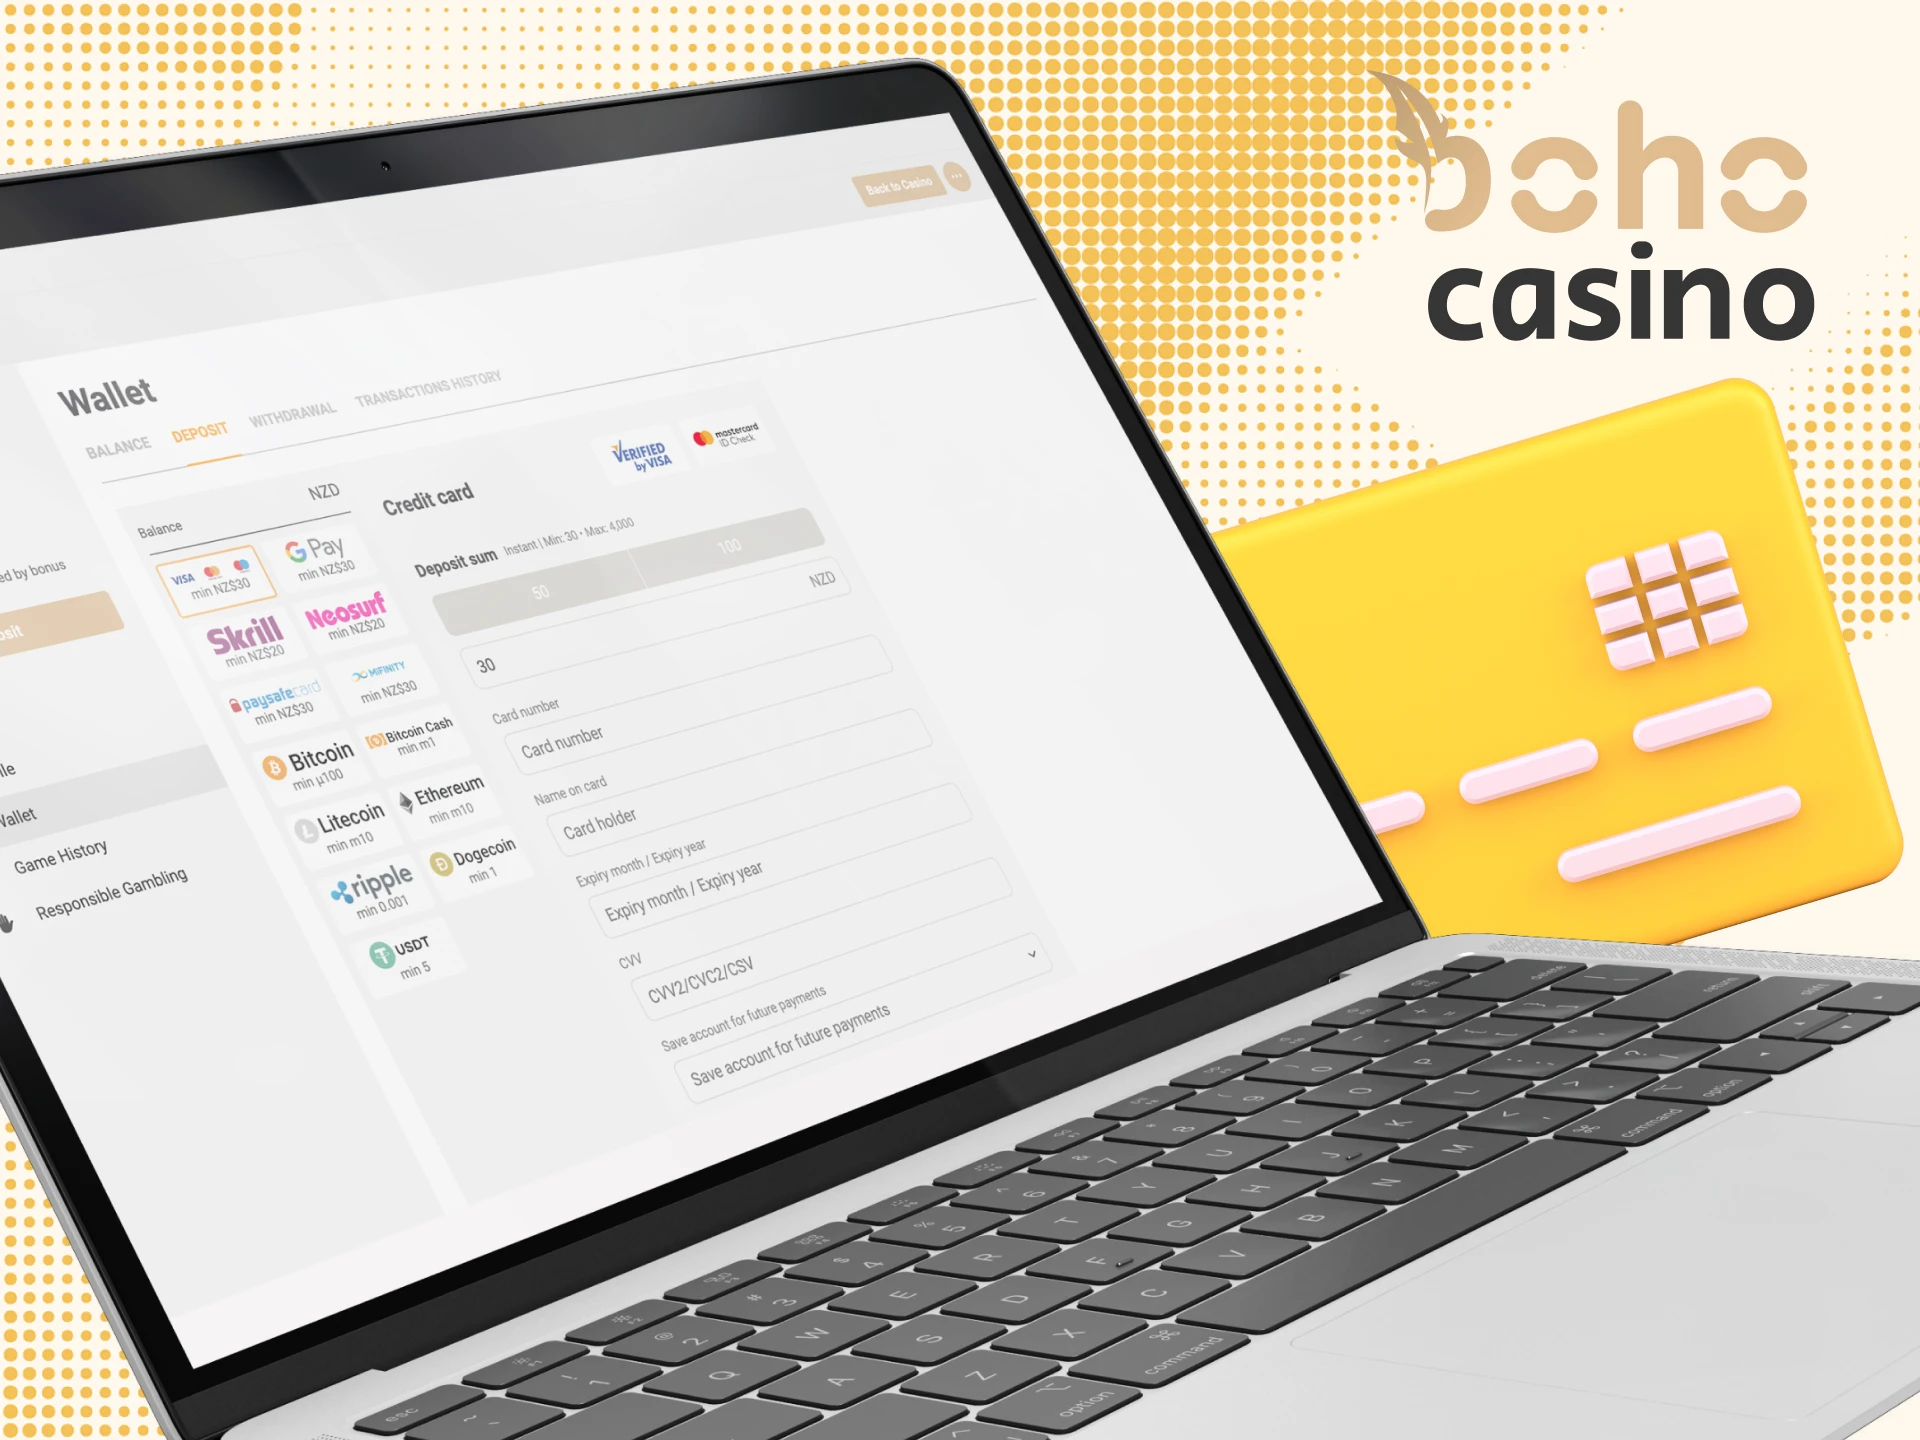 How can I top up my account on the Boho online casino website.